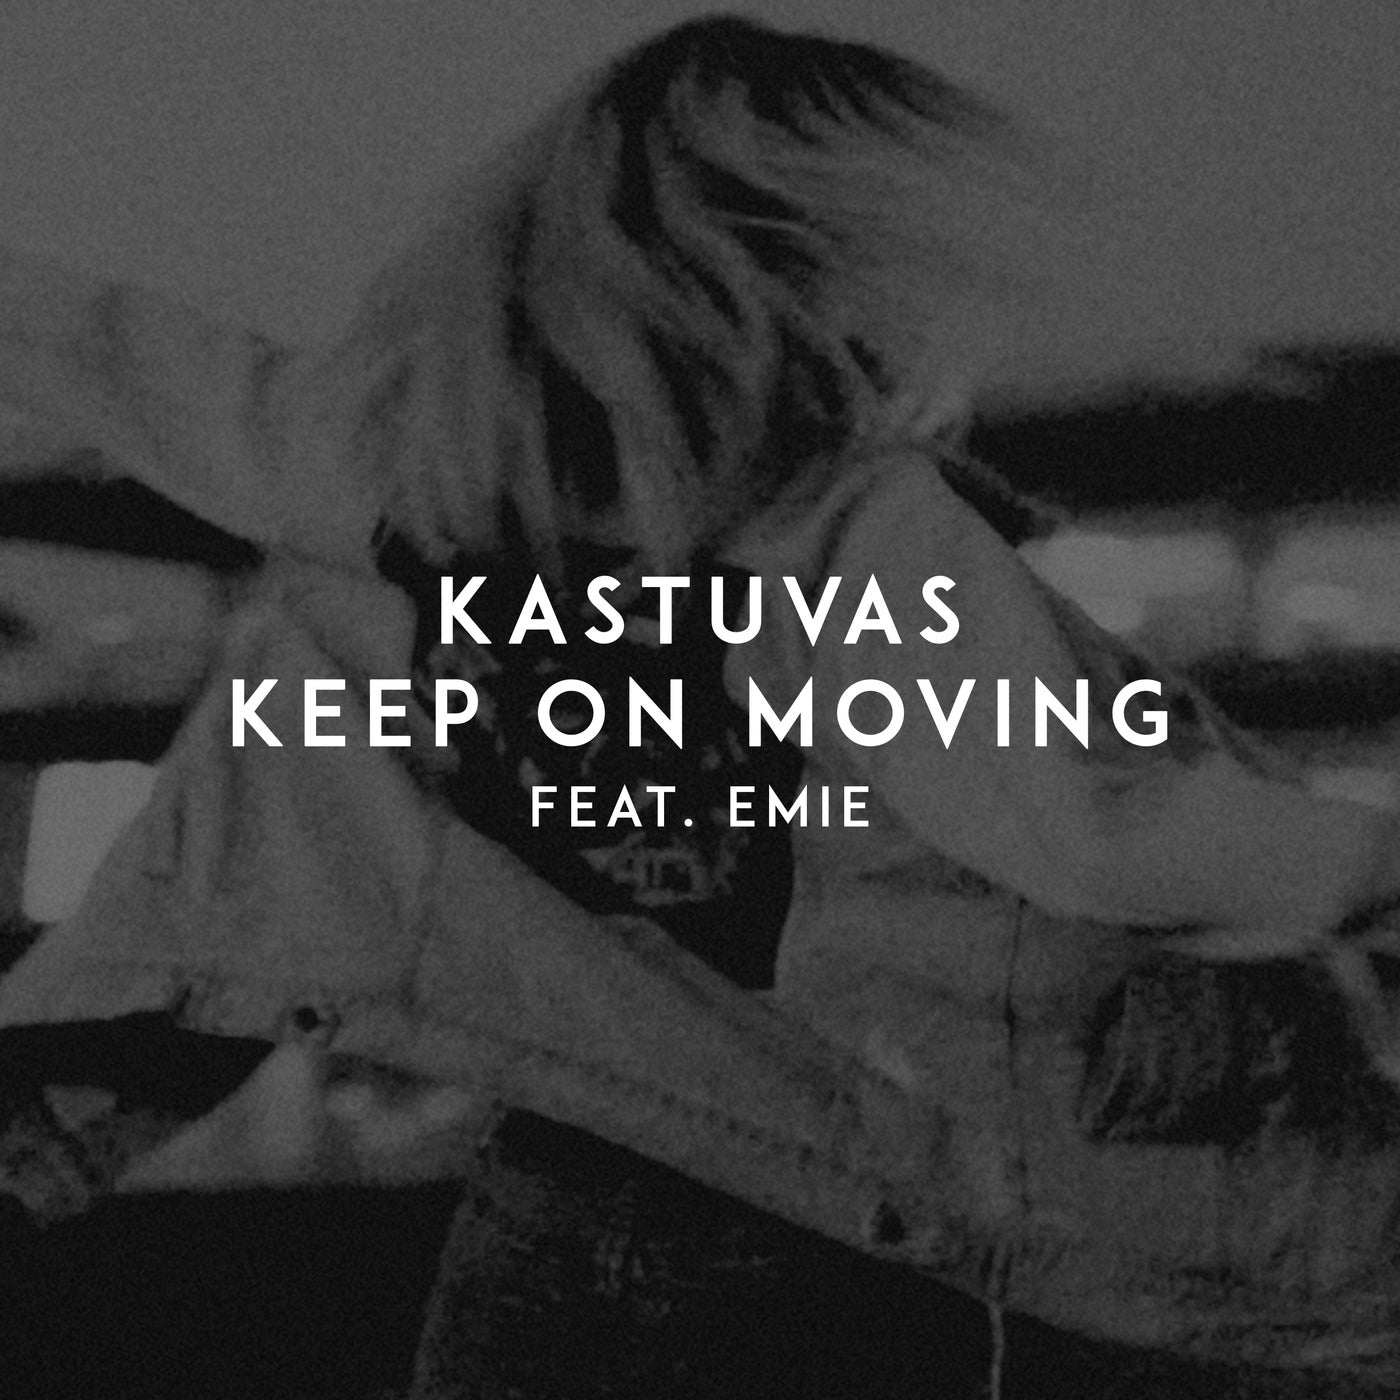 Kastuvas keep. Keep on moving kastuvas. Keep on moving kastuvas feat. Emie. Kastuvas_Yigit_Unal_-_Milkshake. STARSTYLERS keep on moving.